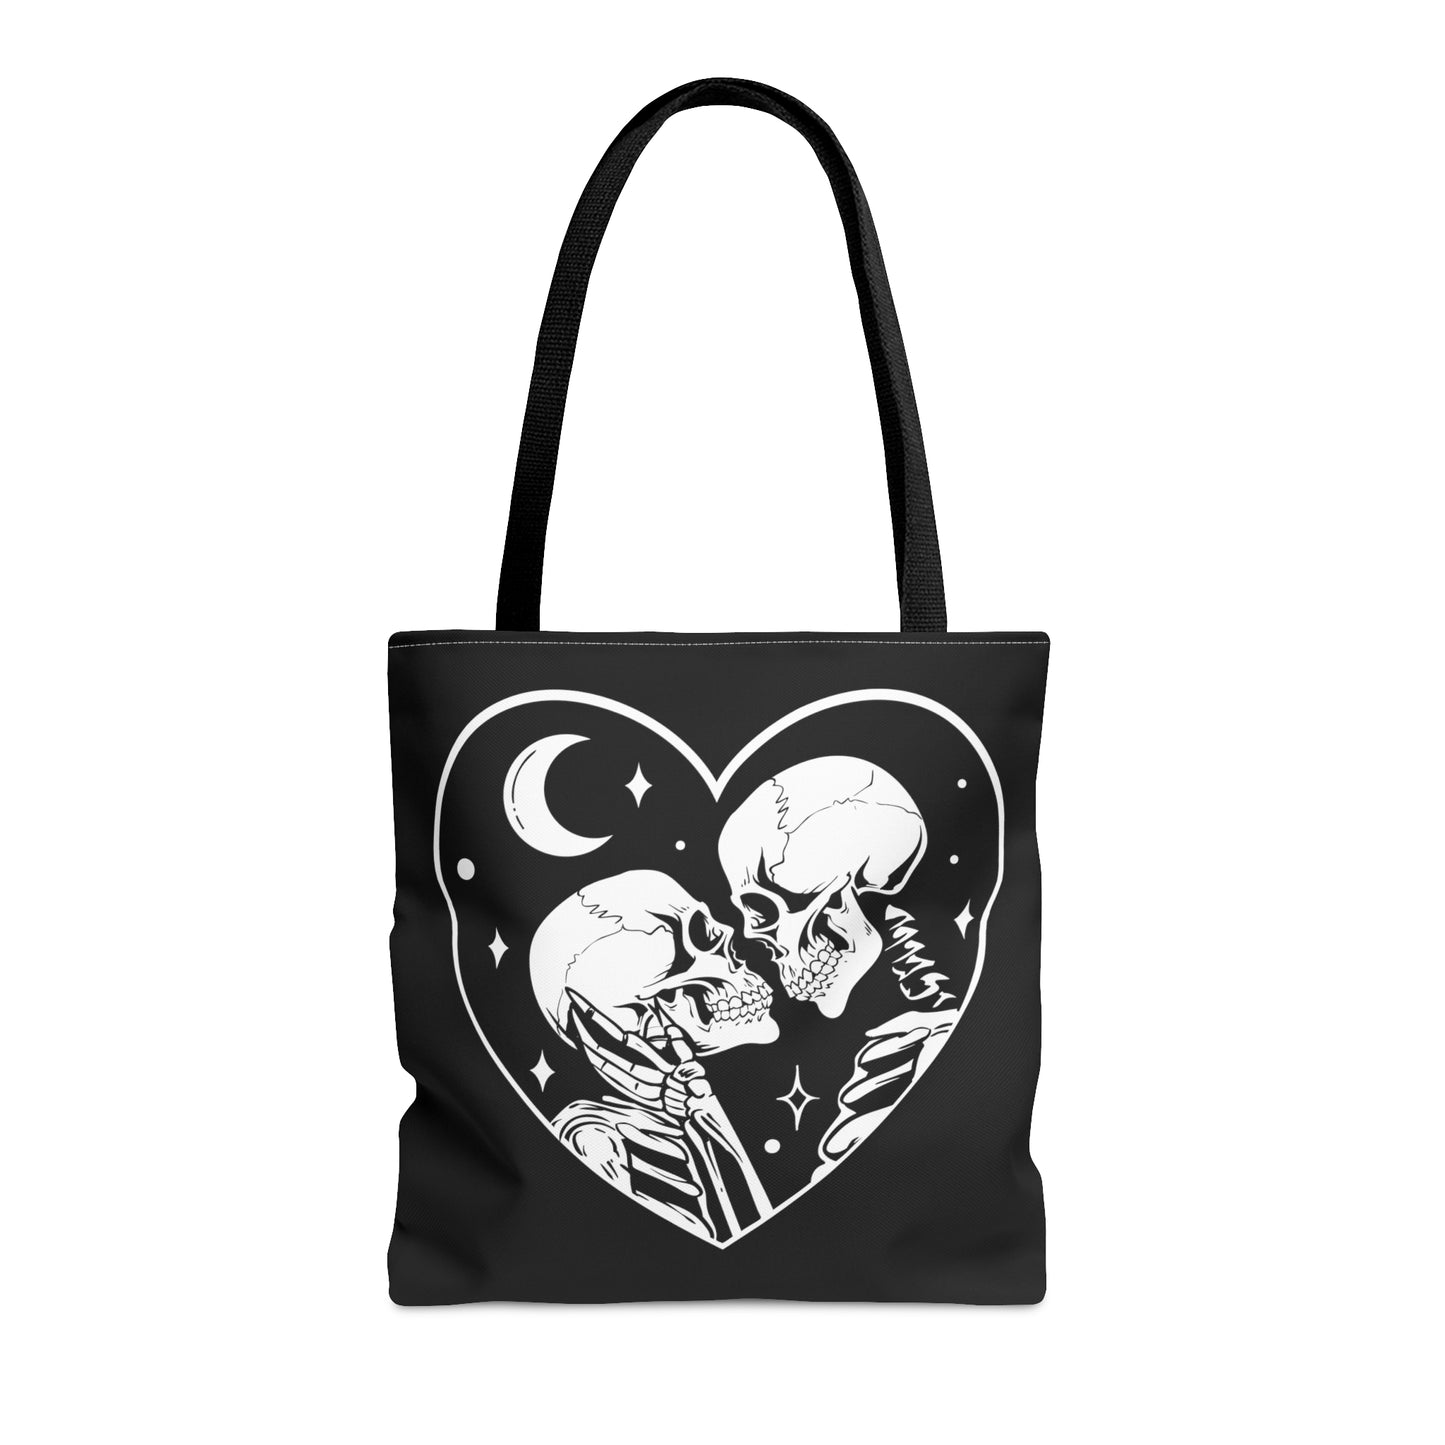 The Lovers Heart Tote Bag